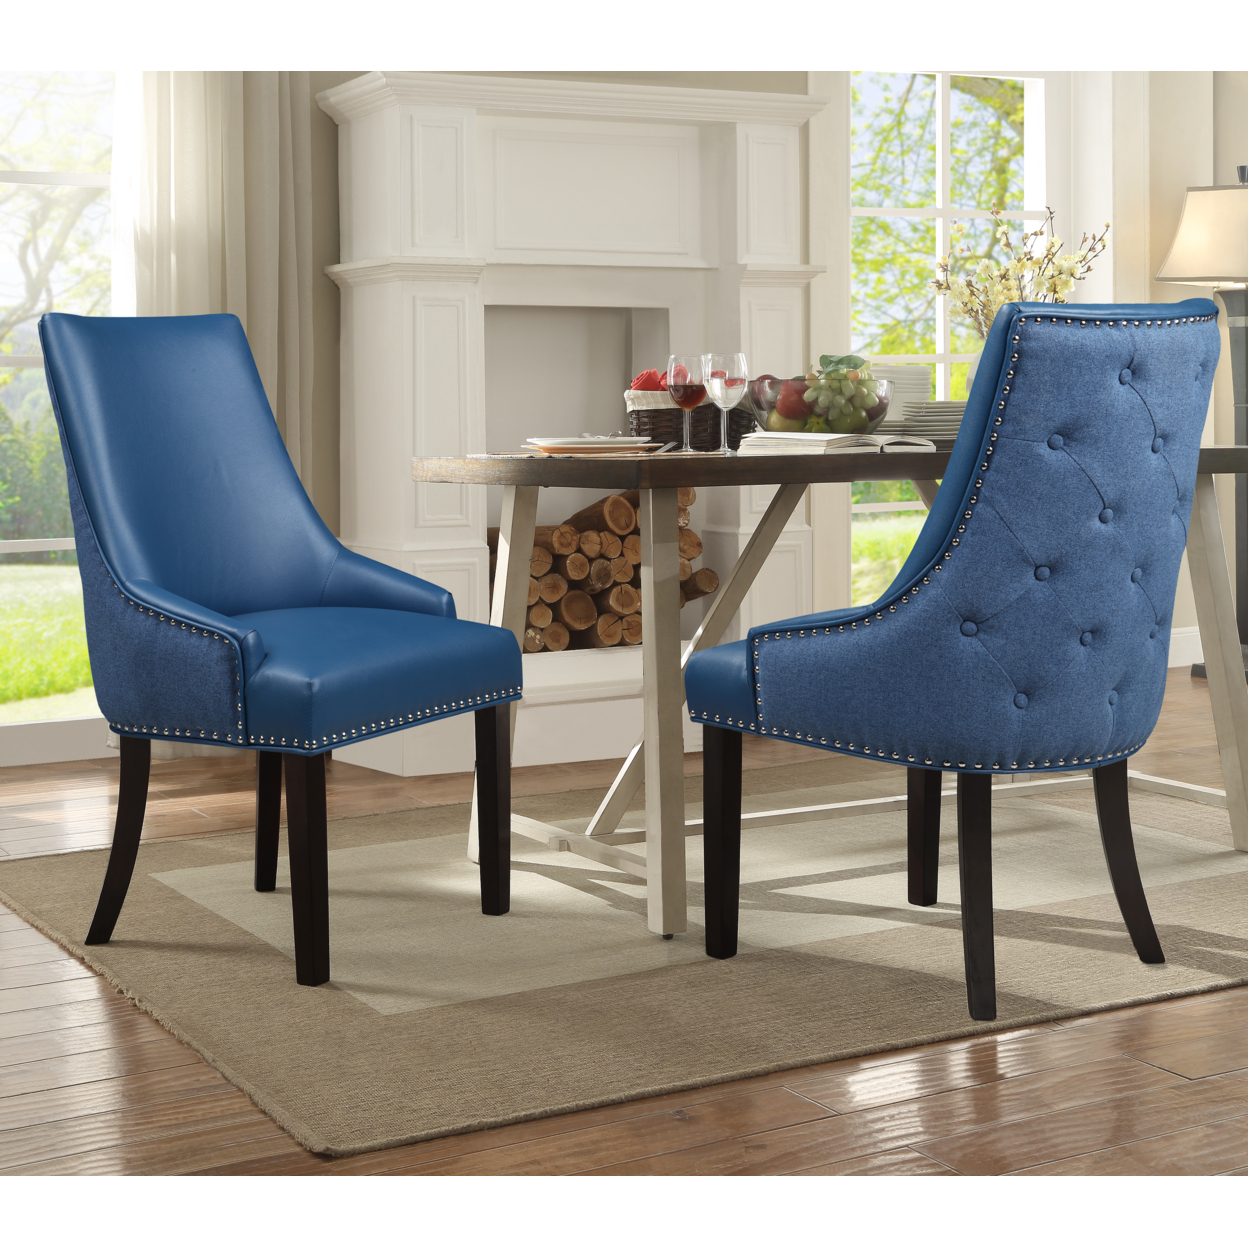 Taylor PU Leather Dining Chair, Set Of 2, Linen Button Tufted With Silver Nailhead Solid Birch Legs - Navy